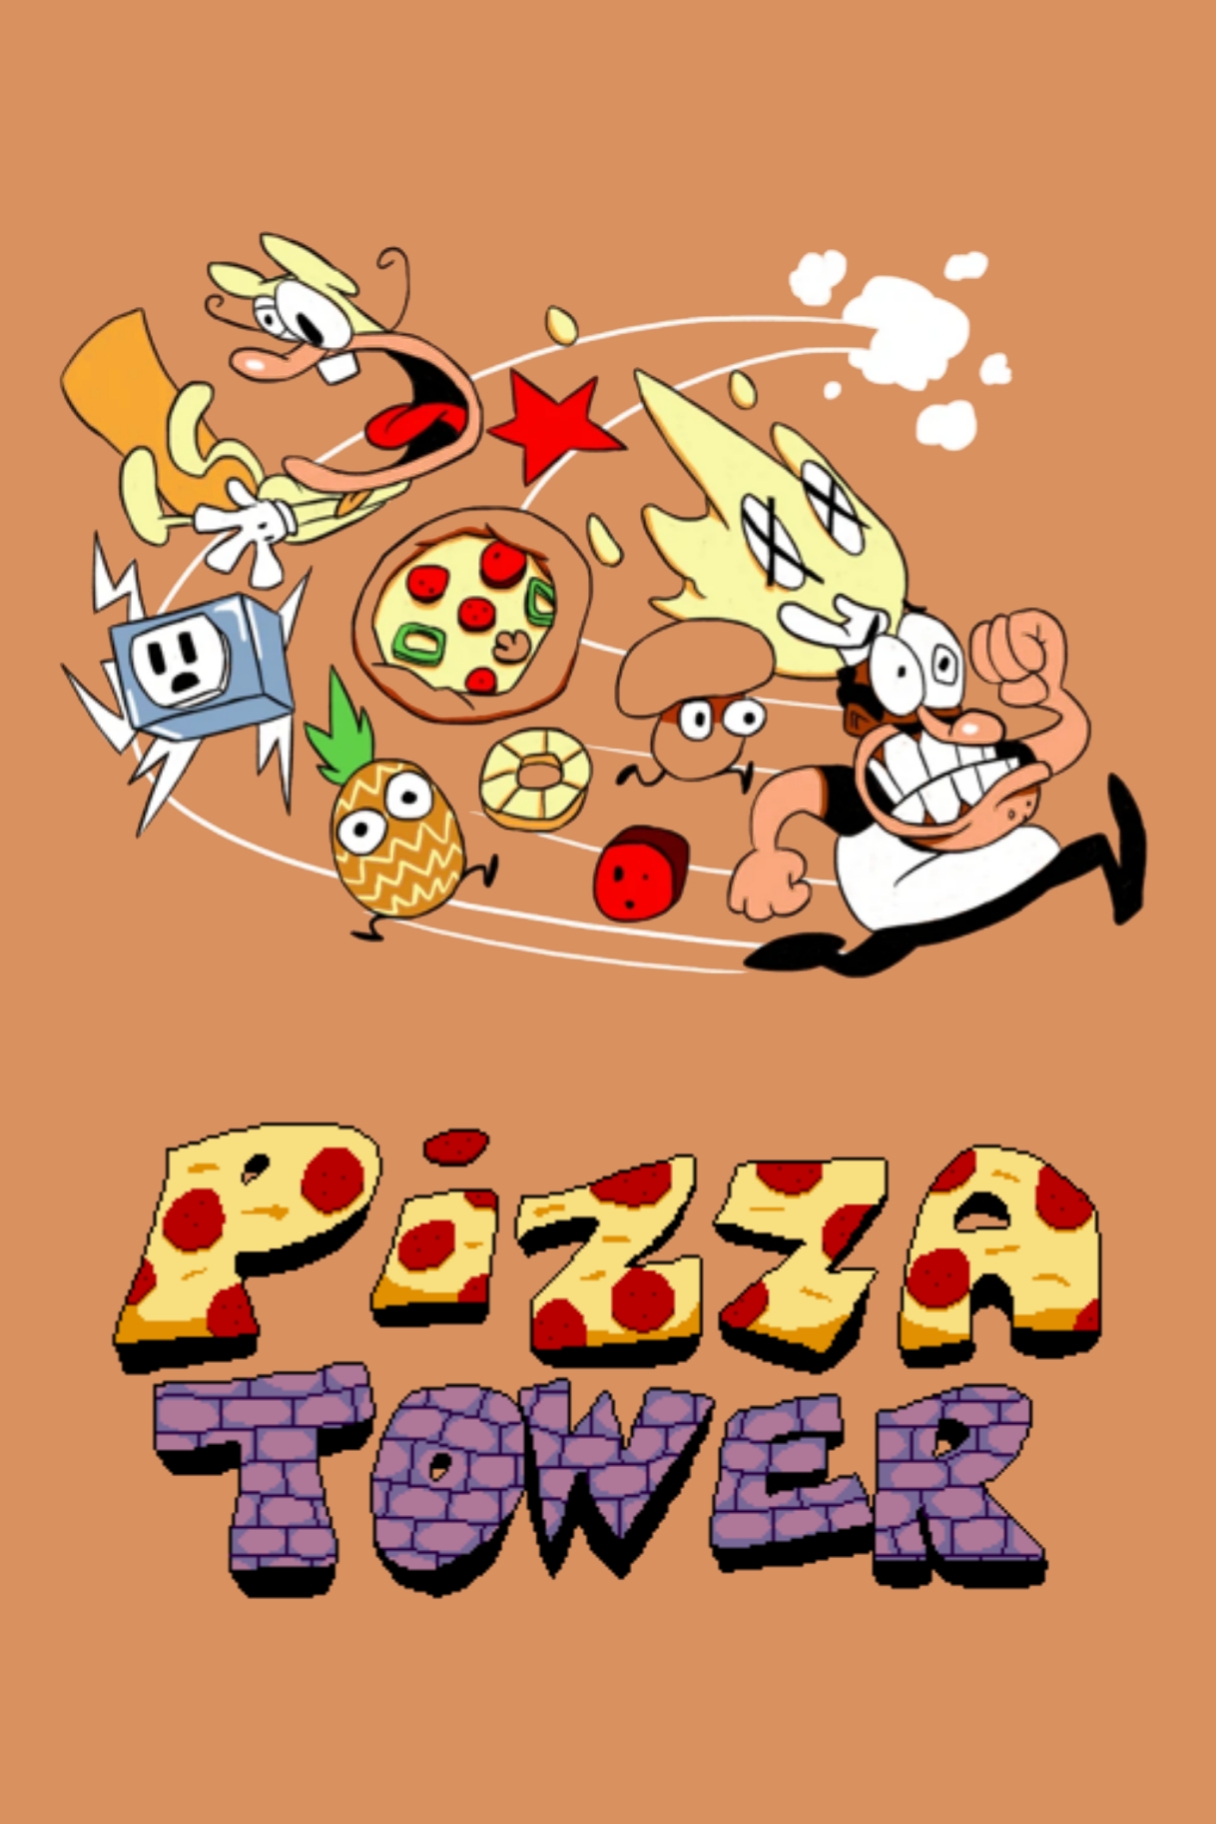 Pizza Tower (𝑭𝑼𝑳𝑳 𝑮𝑨𝑴𝑬 🍕) 